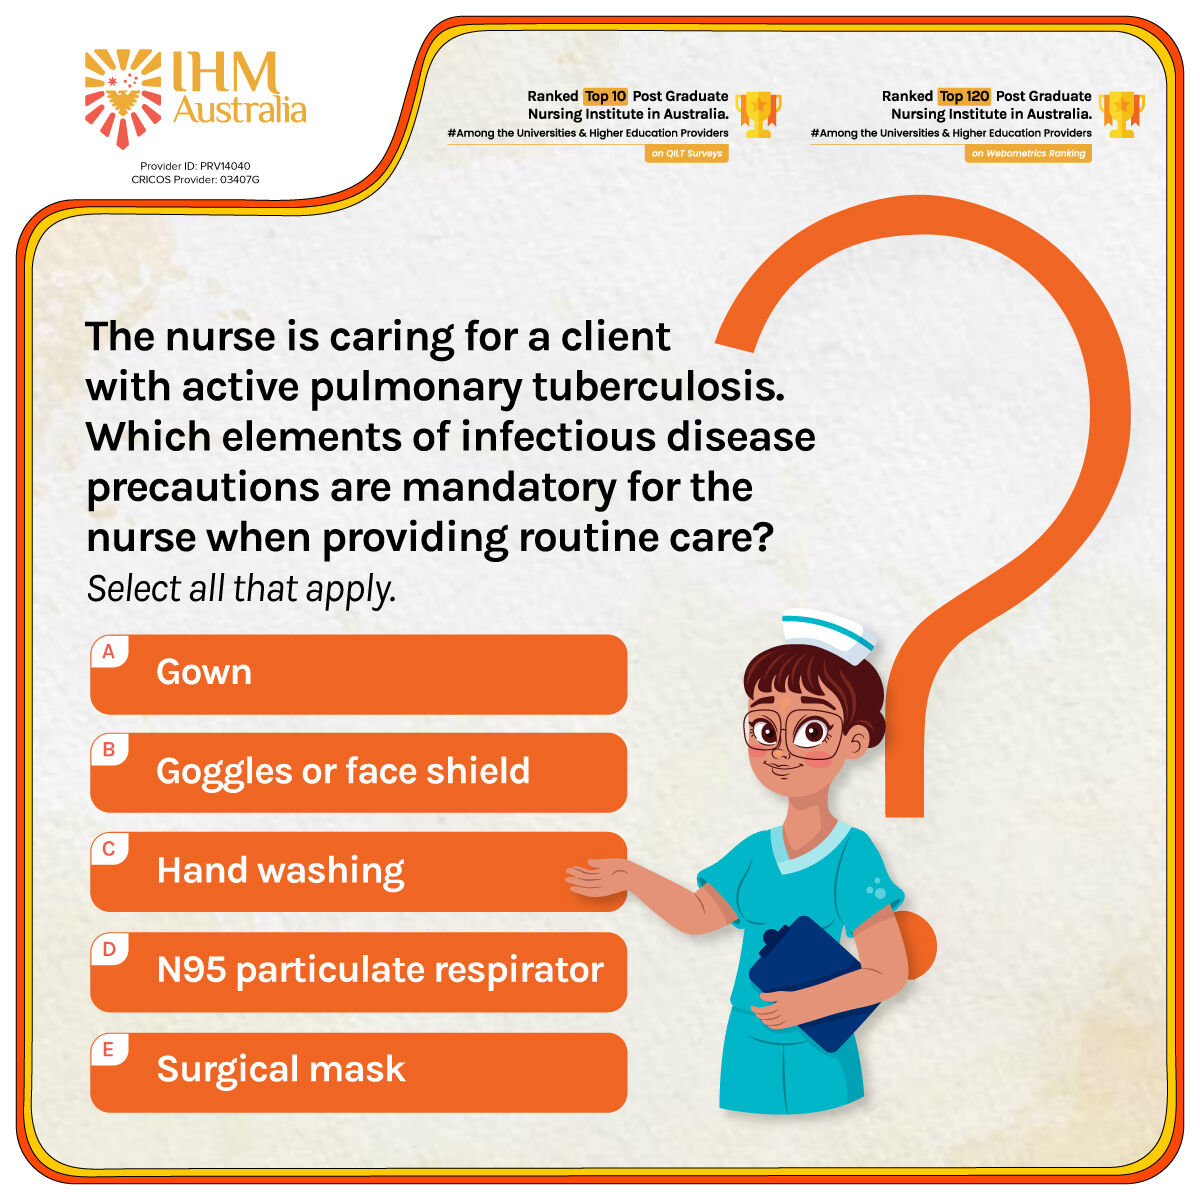 👩‍⚕️ Dive into #NCLEXThursday with IHM!
🏆 Sharpen your skills and ace our weekly challenge!

🌟 Questions or concerns? Discuss with us: bit.ly/3FzcE2n

#IHM #IHMAustralia #NCLEX #NCLEXPrep #NursingCareer #InternationalNurse #OnlineLearning #NursingEducation